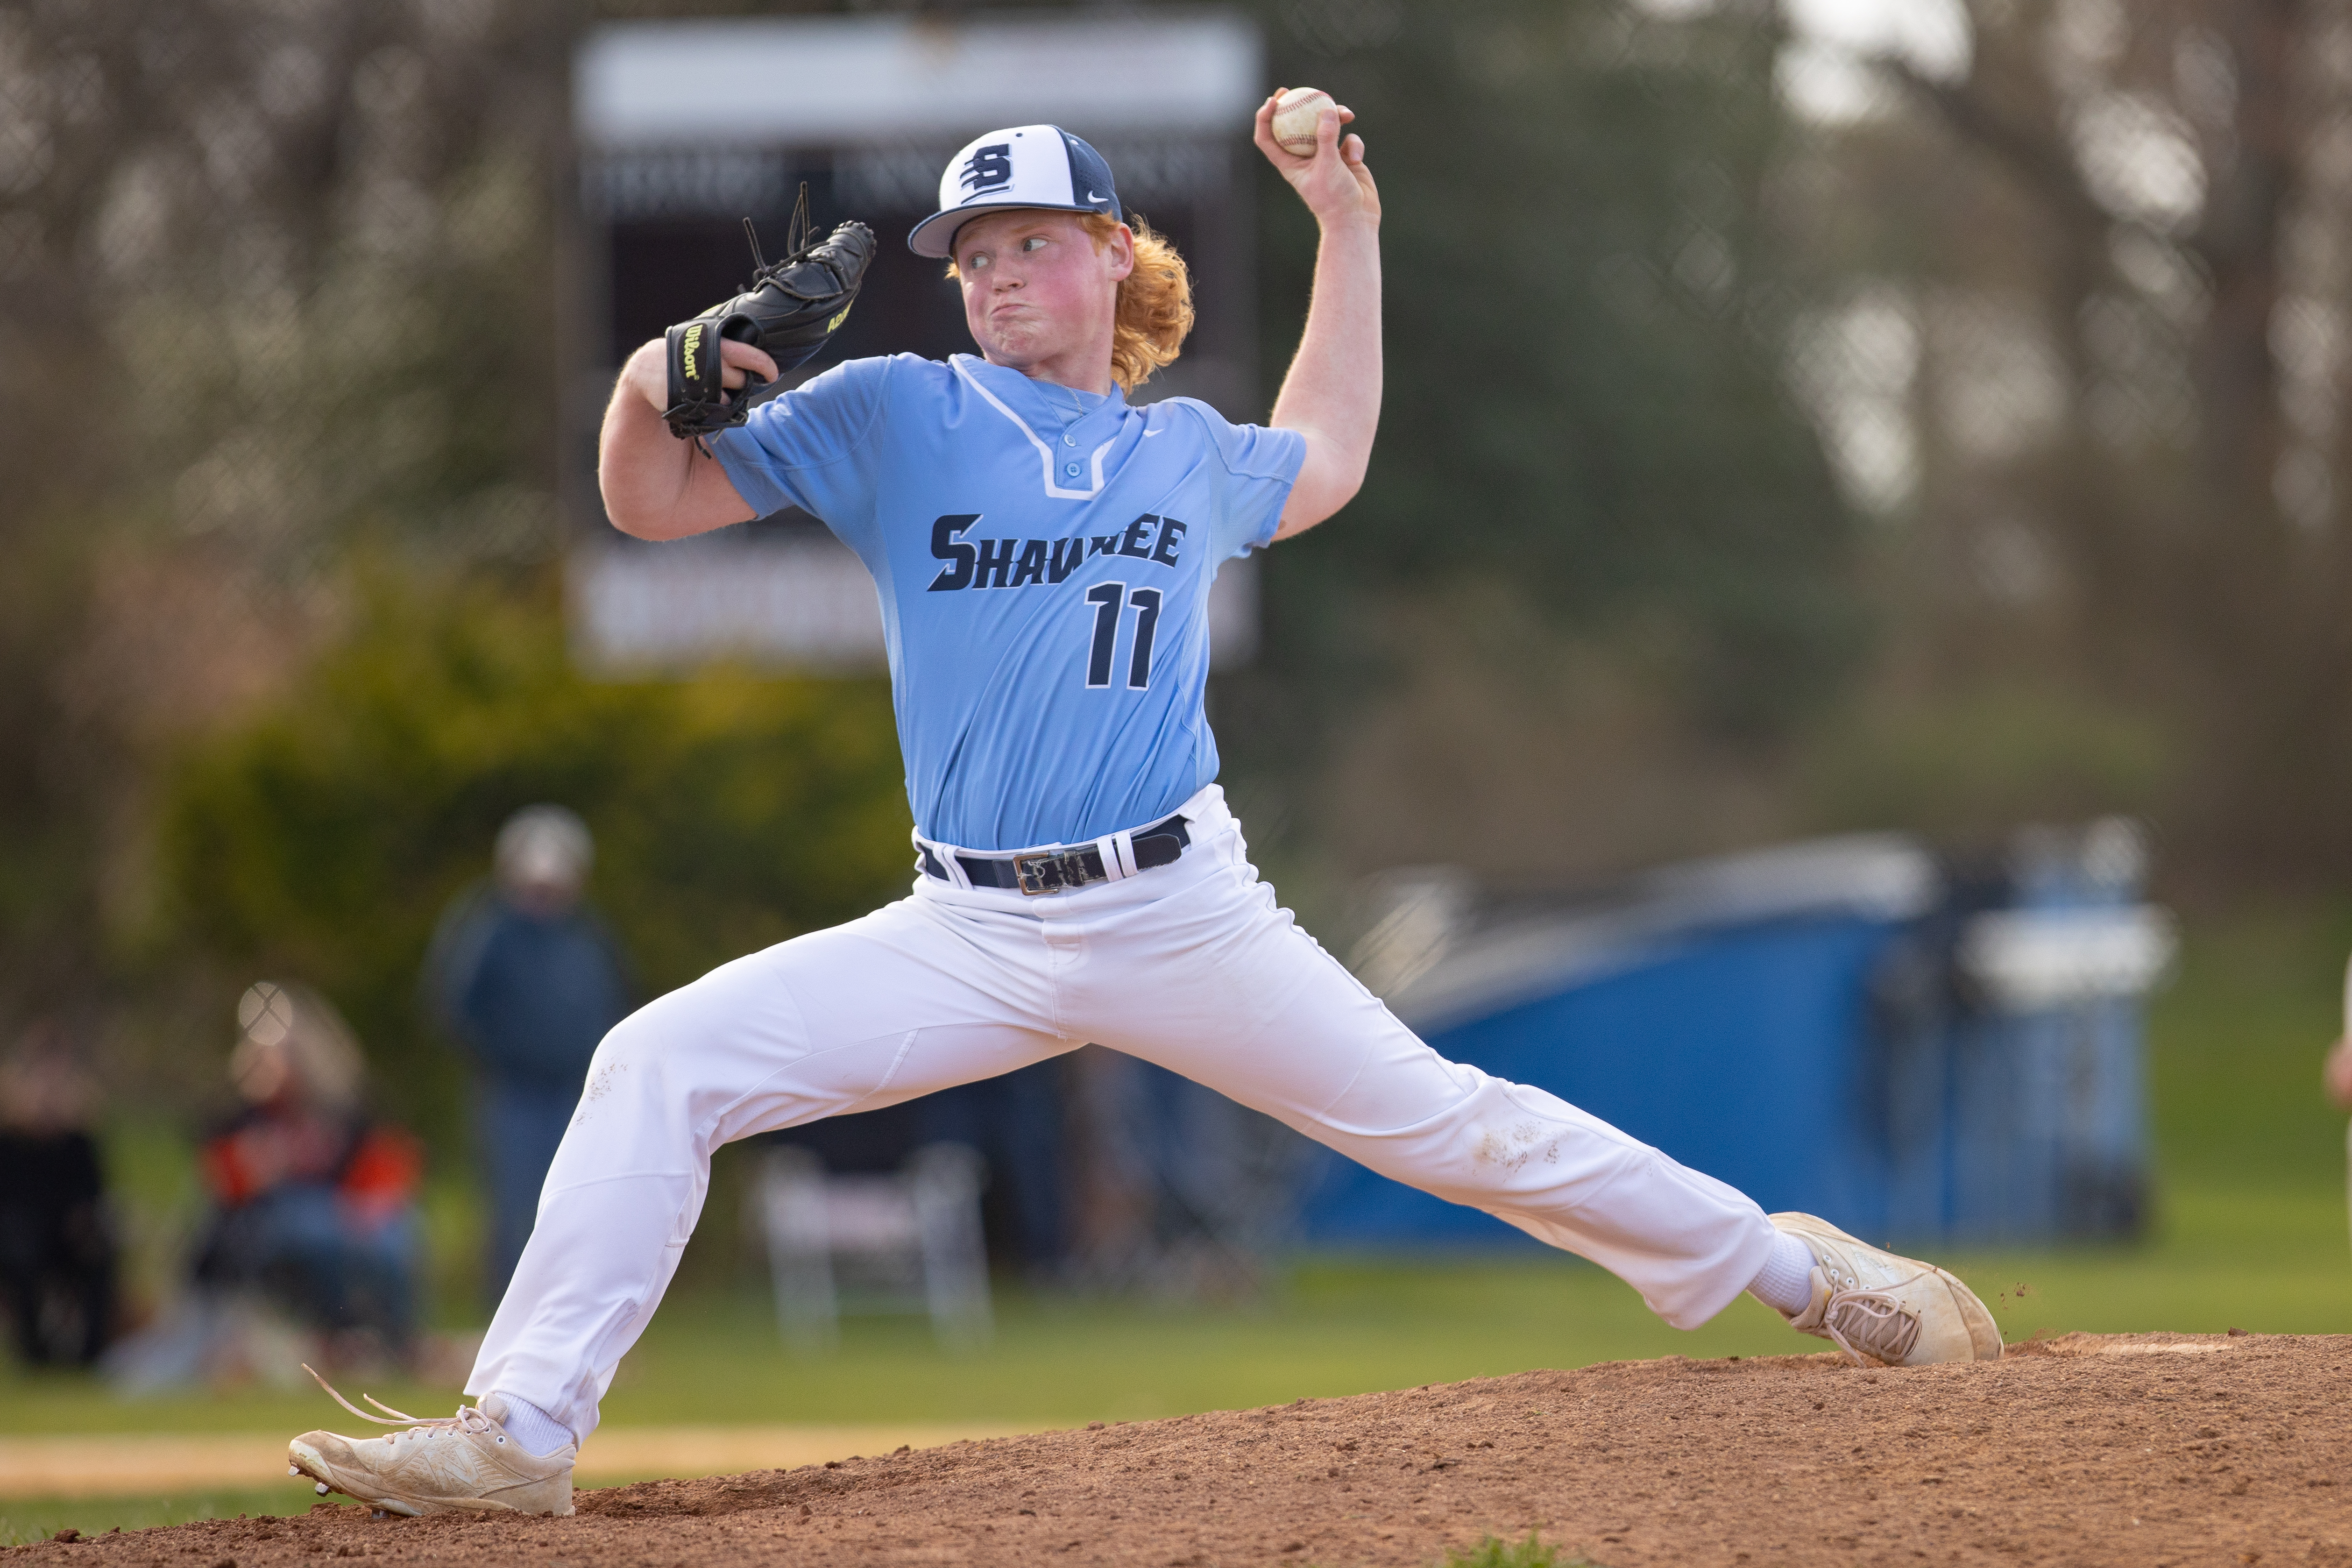 South Jersey baseball notes: Fresh faces in the dugout, big plays